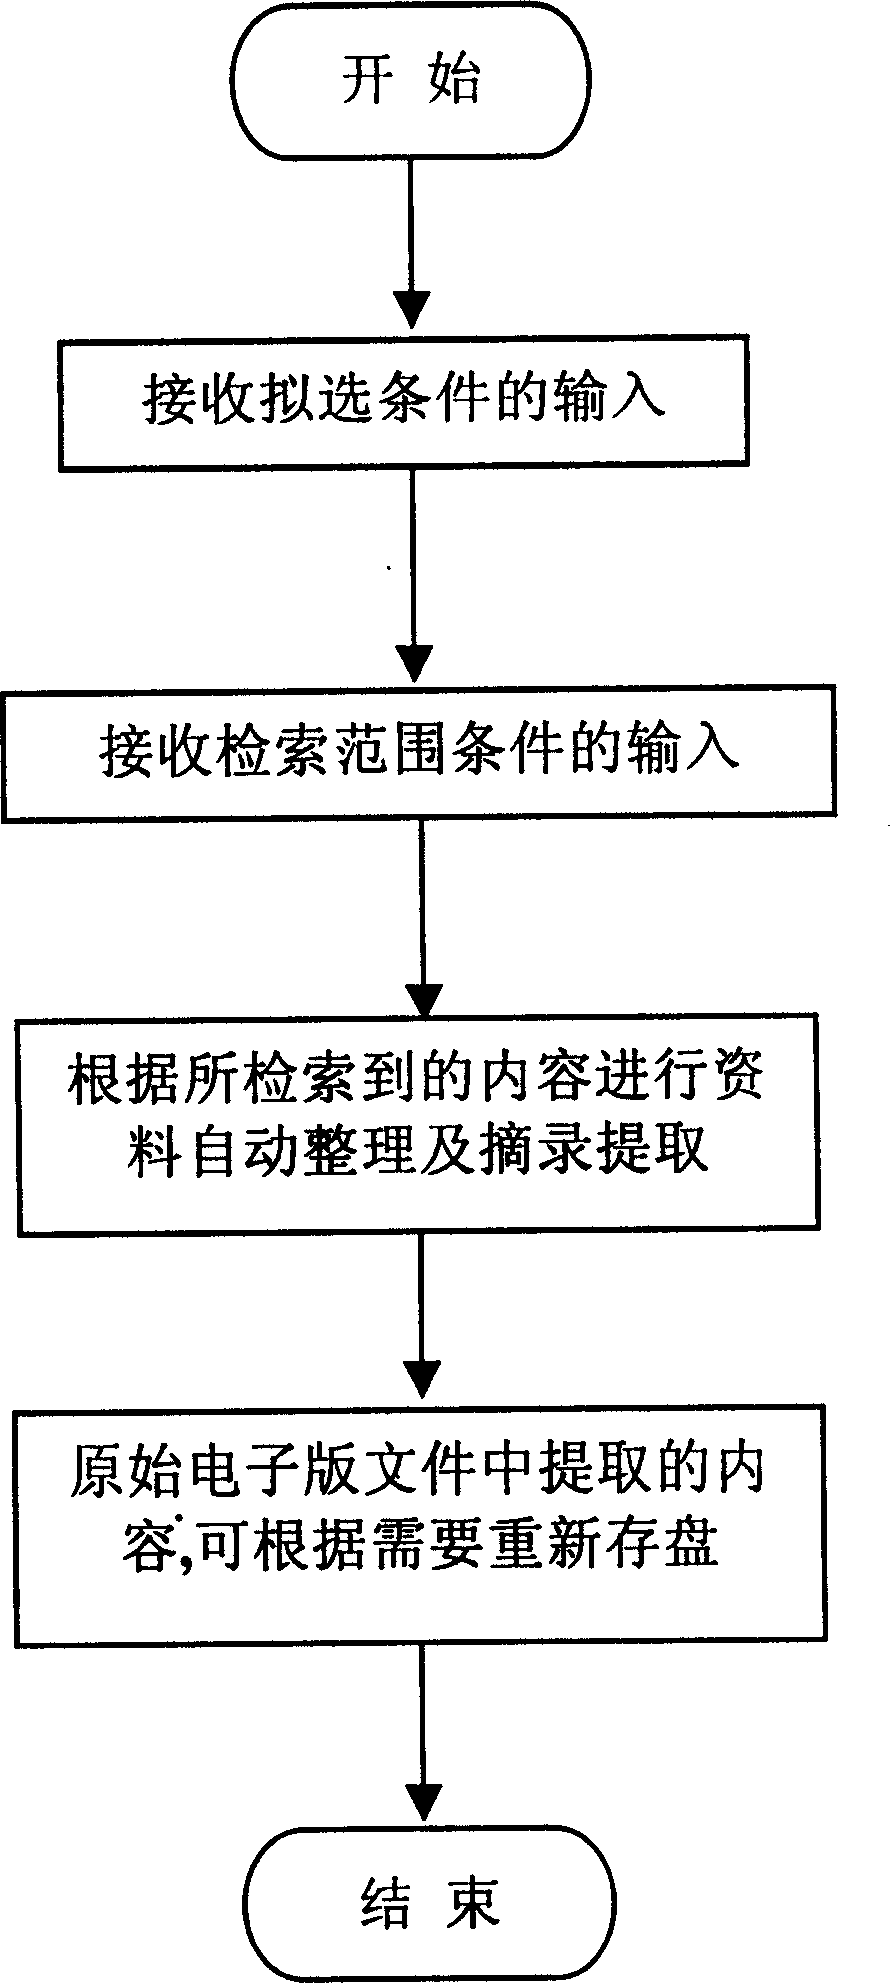 Method for auto-extracting marked data content in electronic file